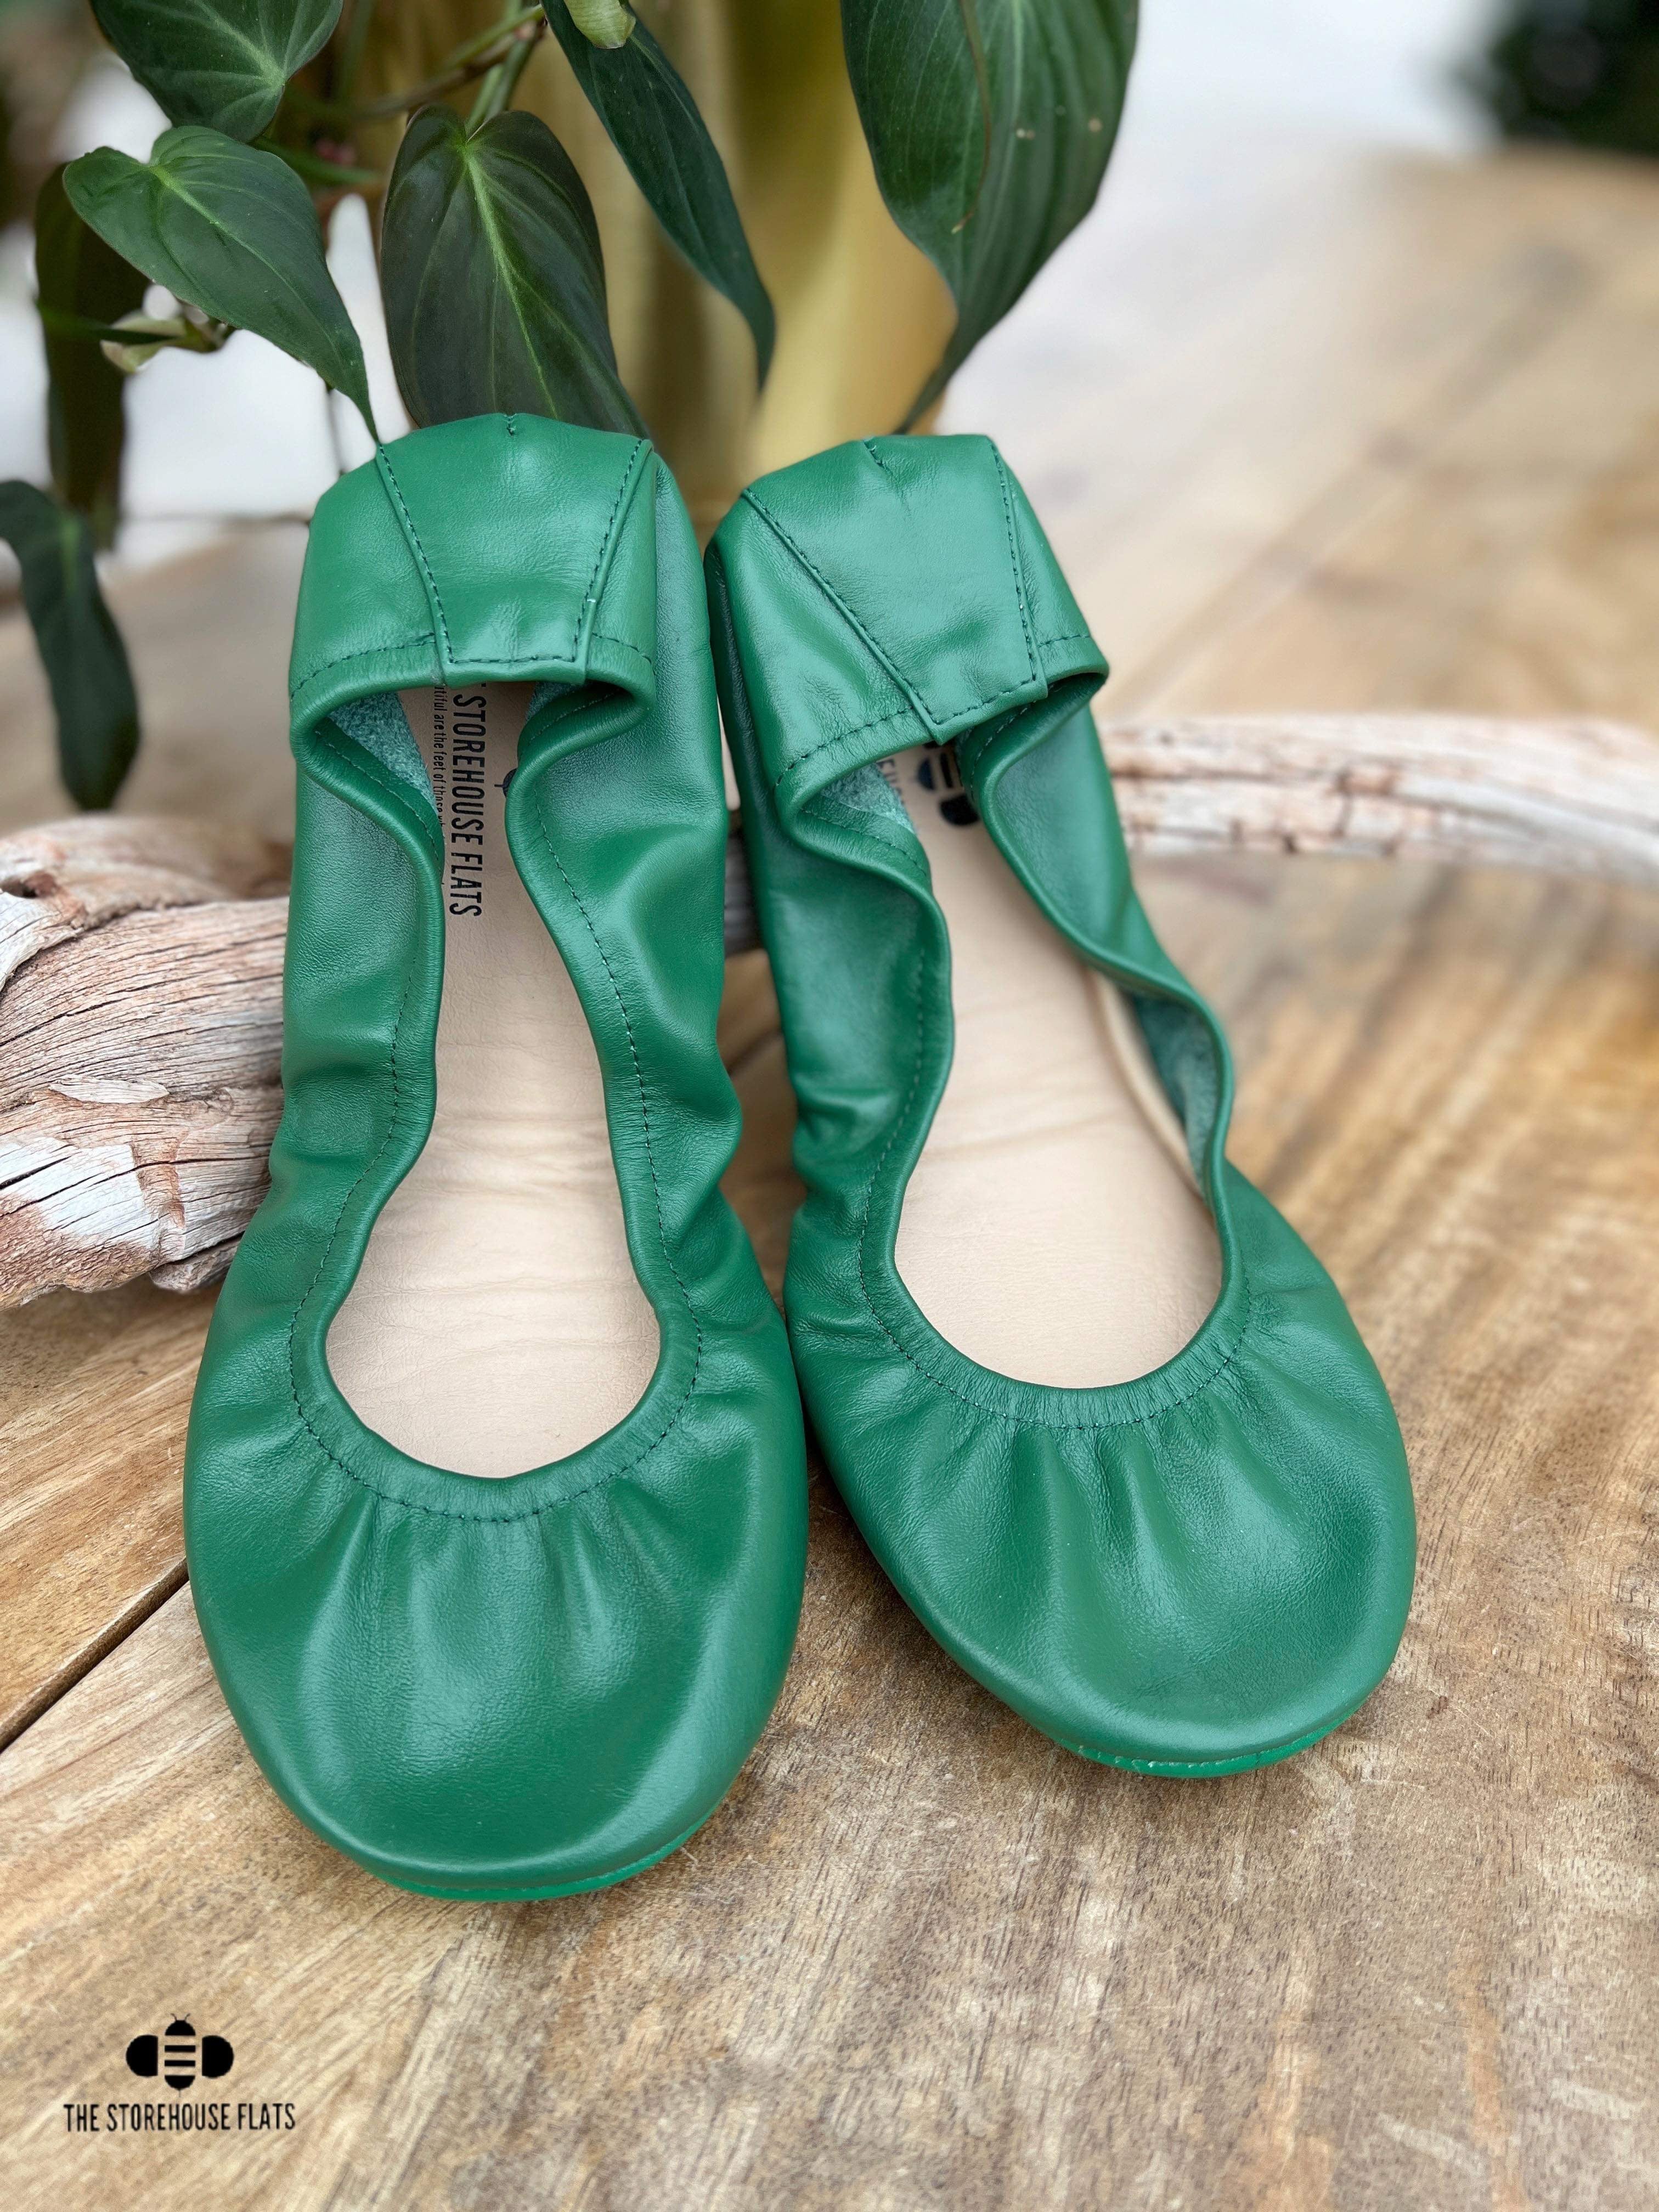 KELLY GREEN CLASSIC | IN STOCK